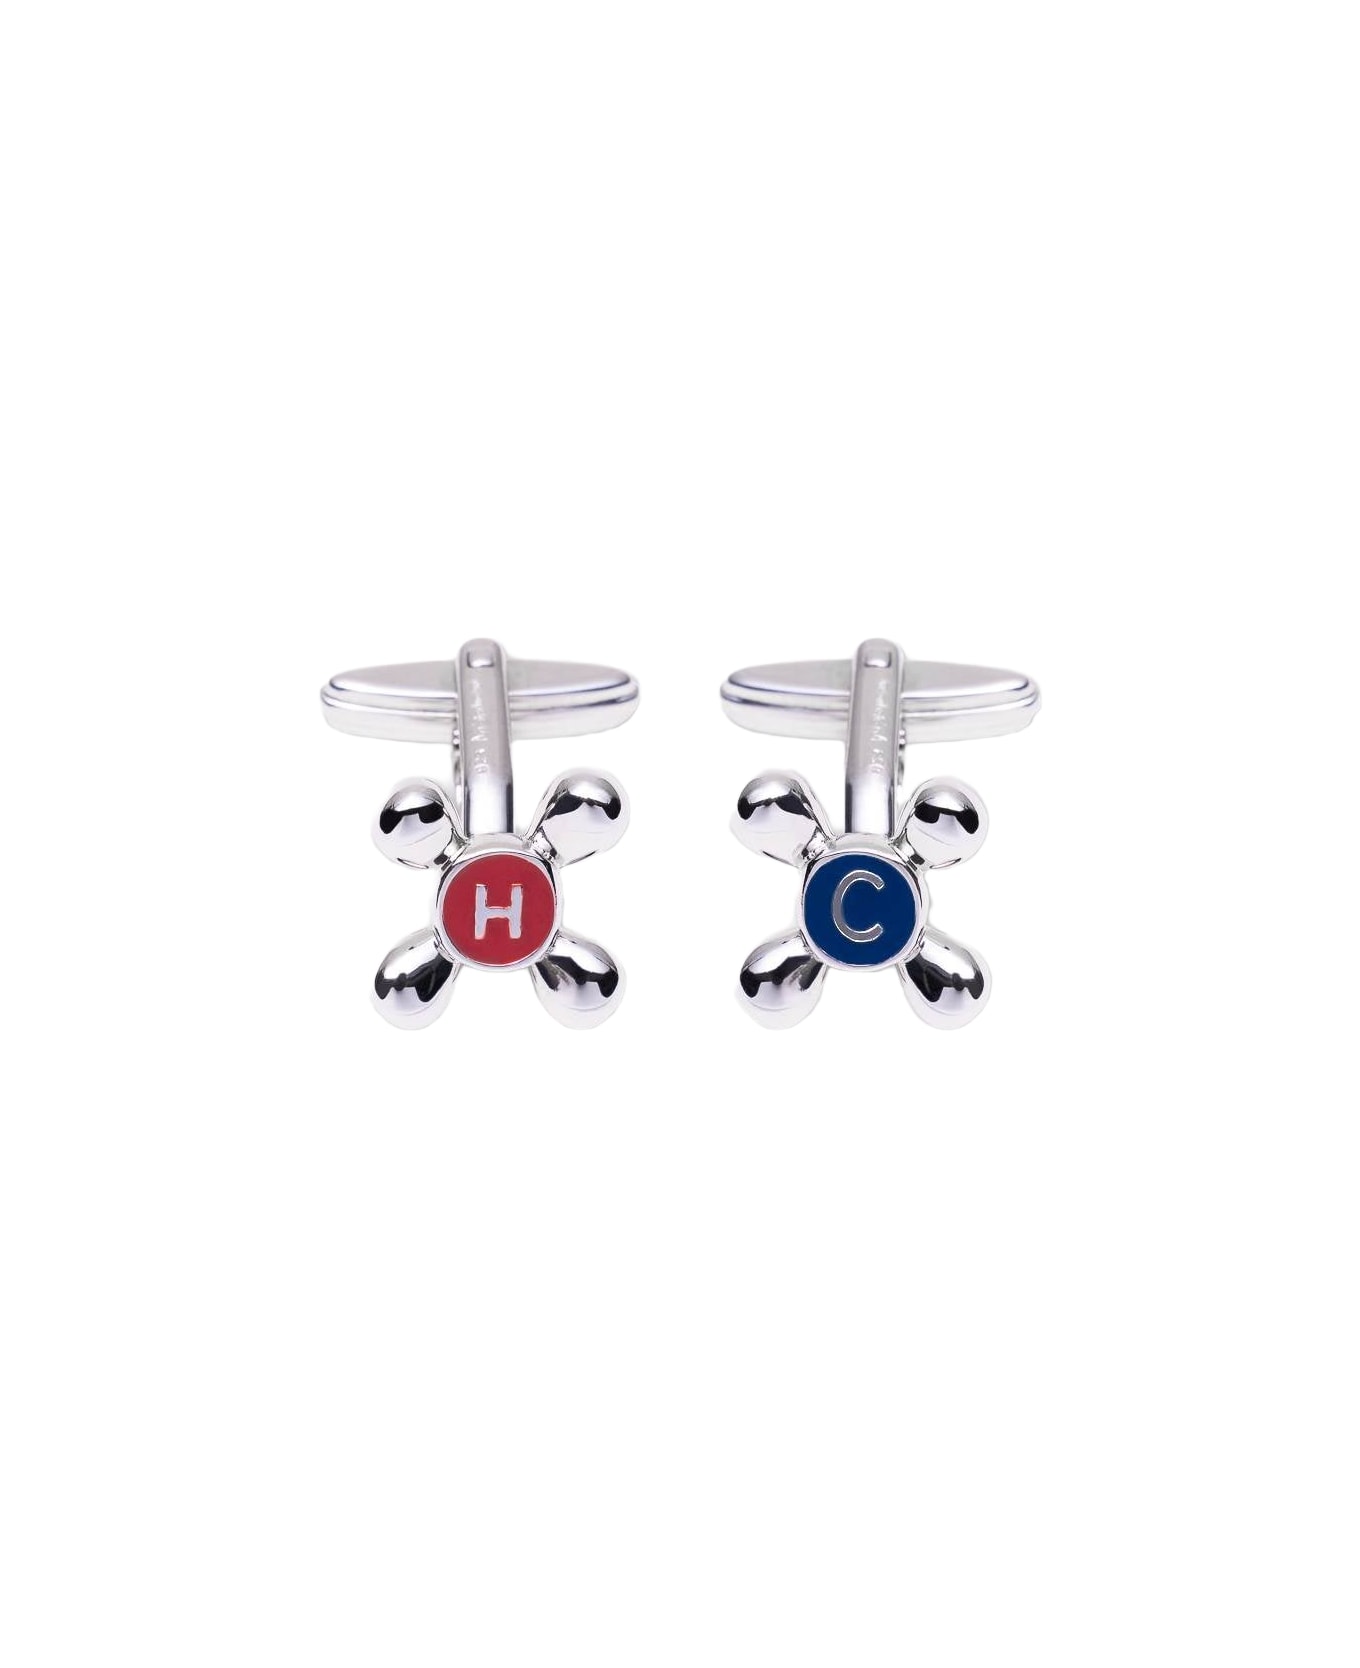 Larusmiani Cufflinks 'cold And Hot Water' Cufflinks - Neutral カフリンクス